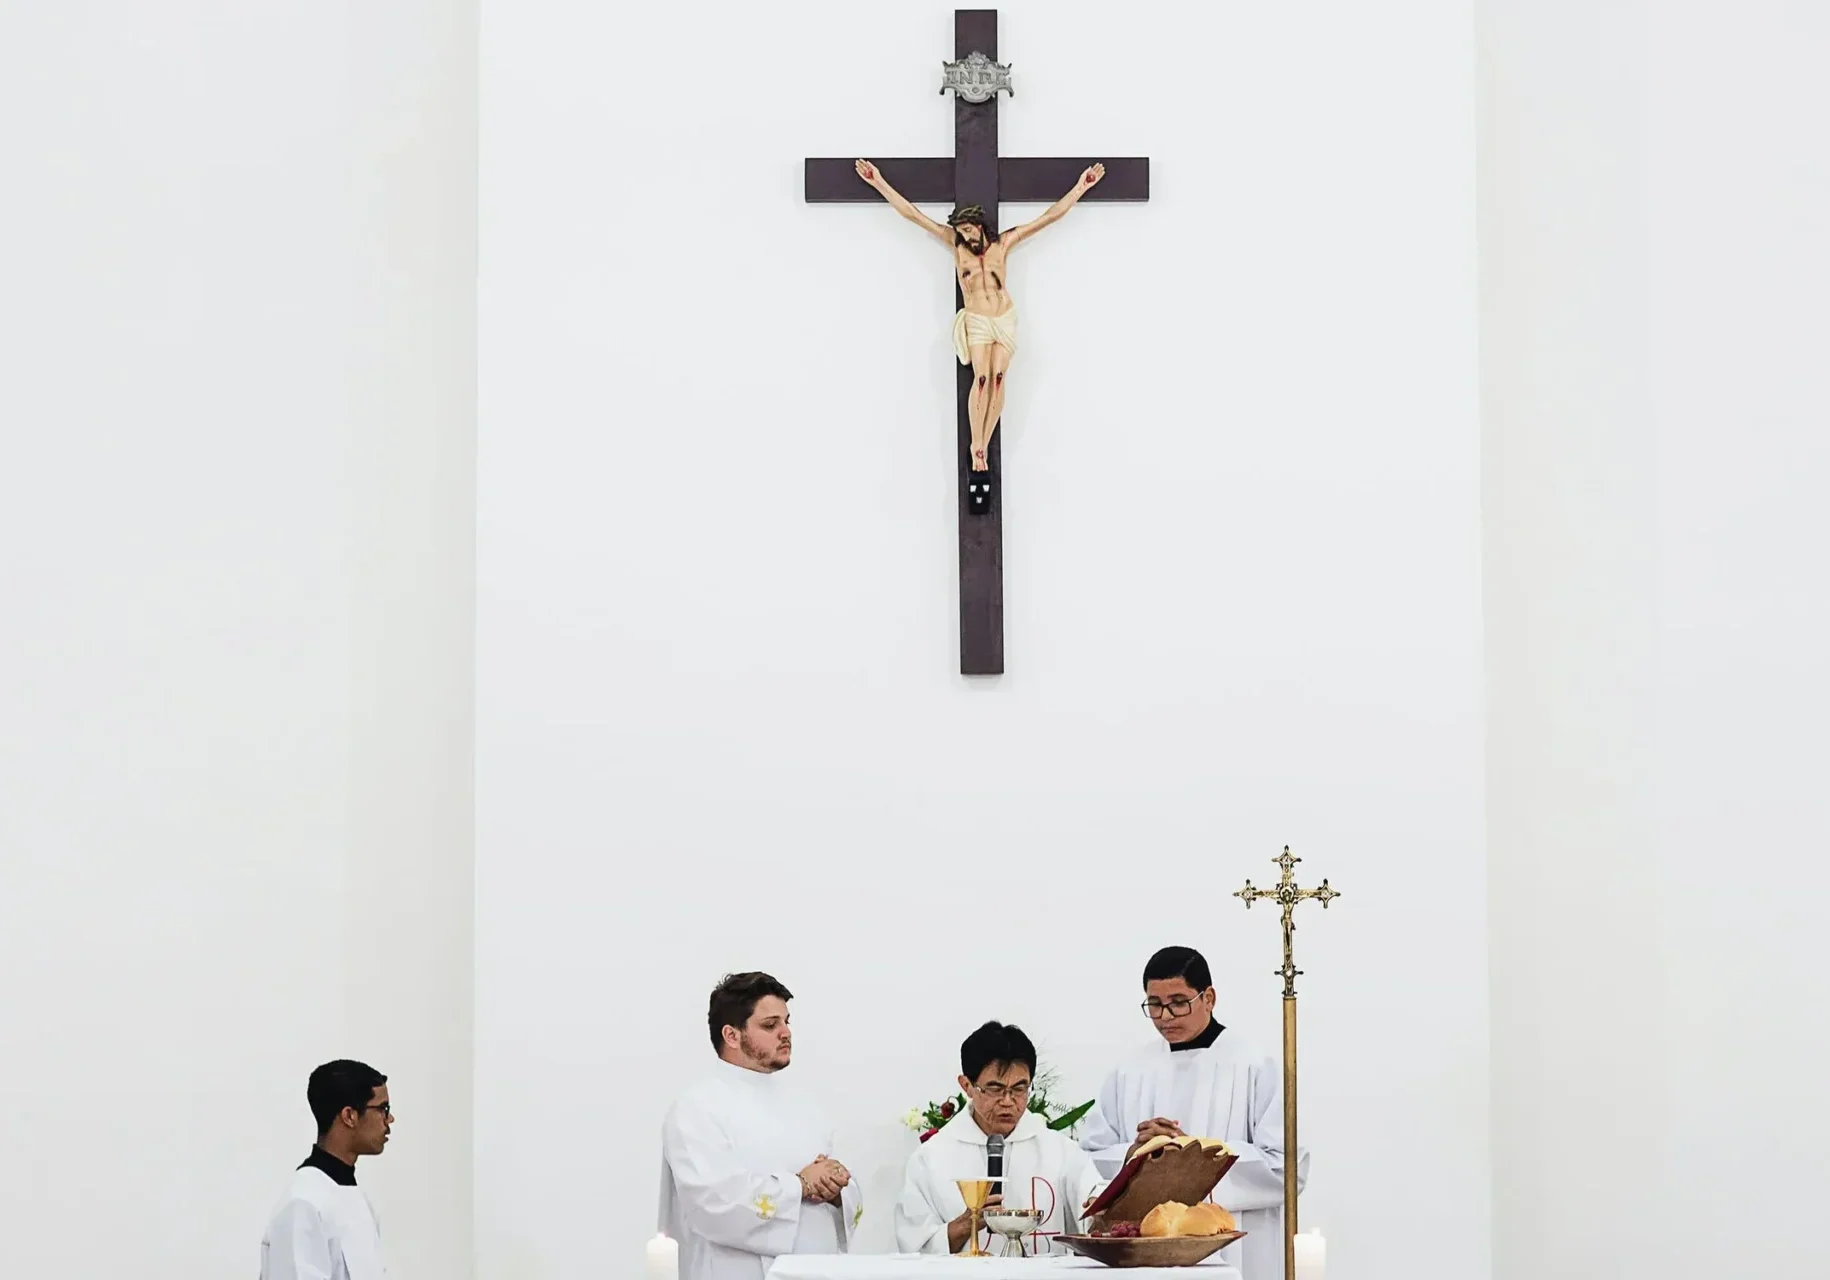 four people praying in a church in white attire